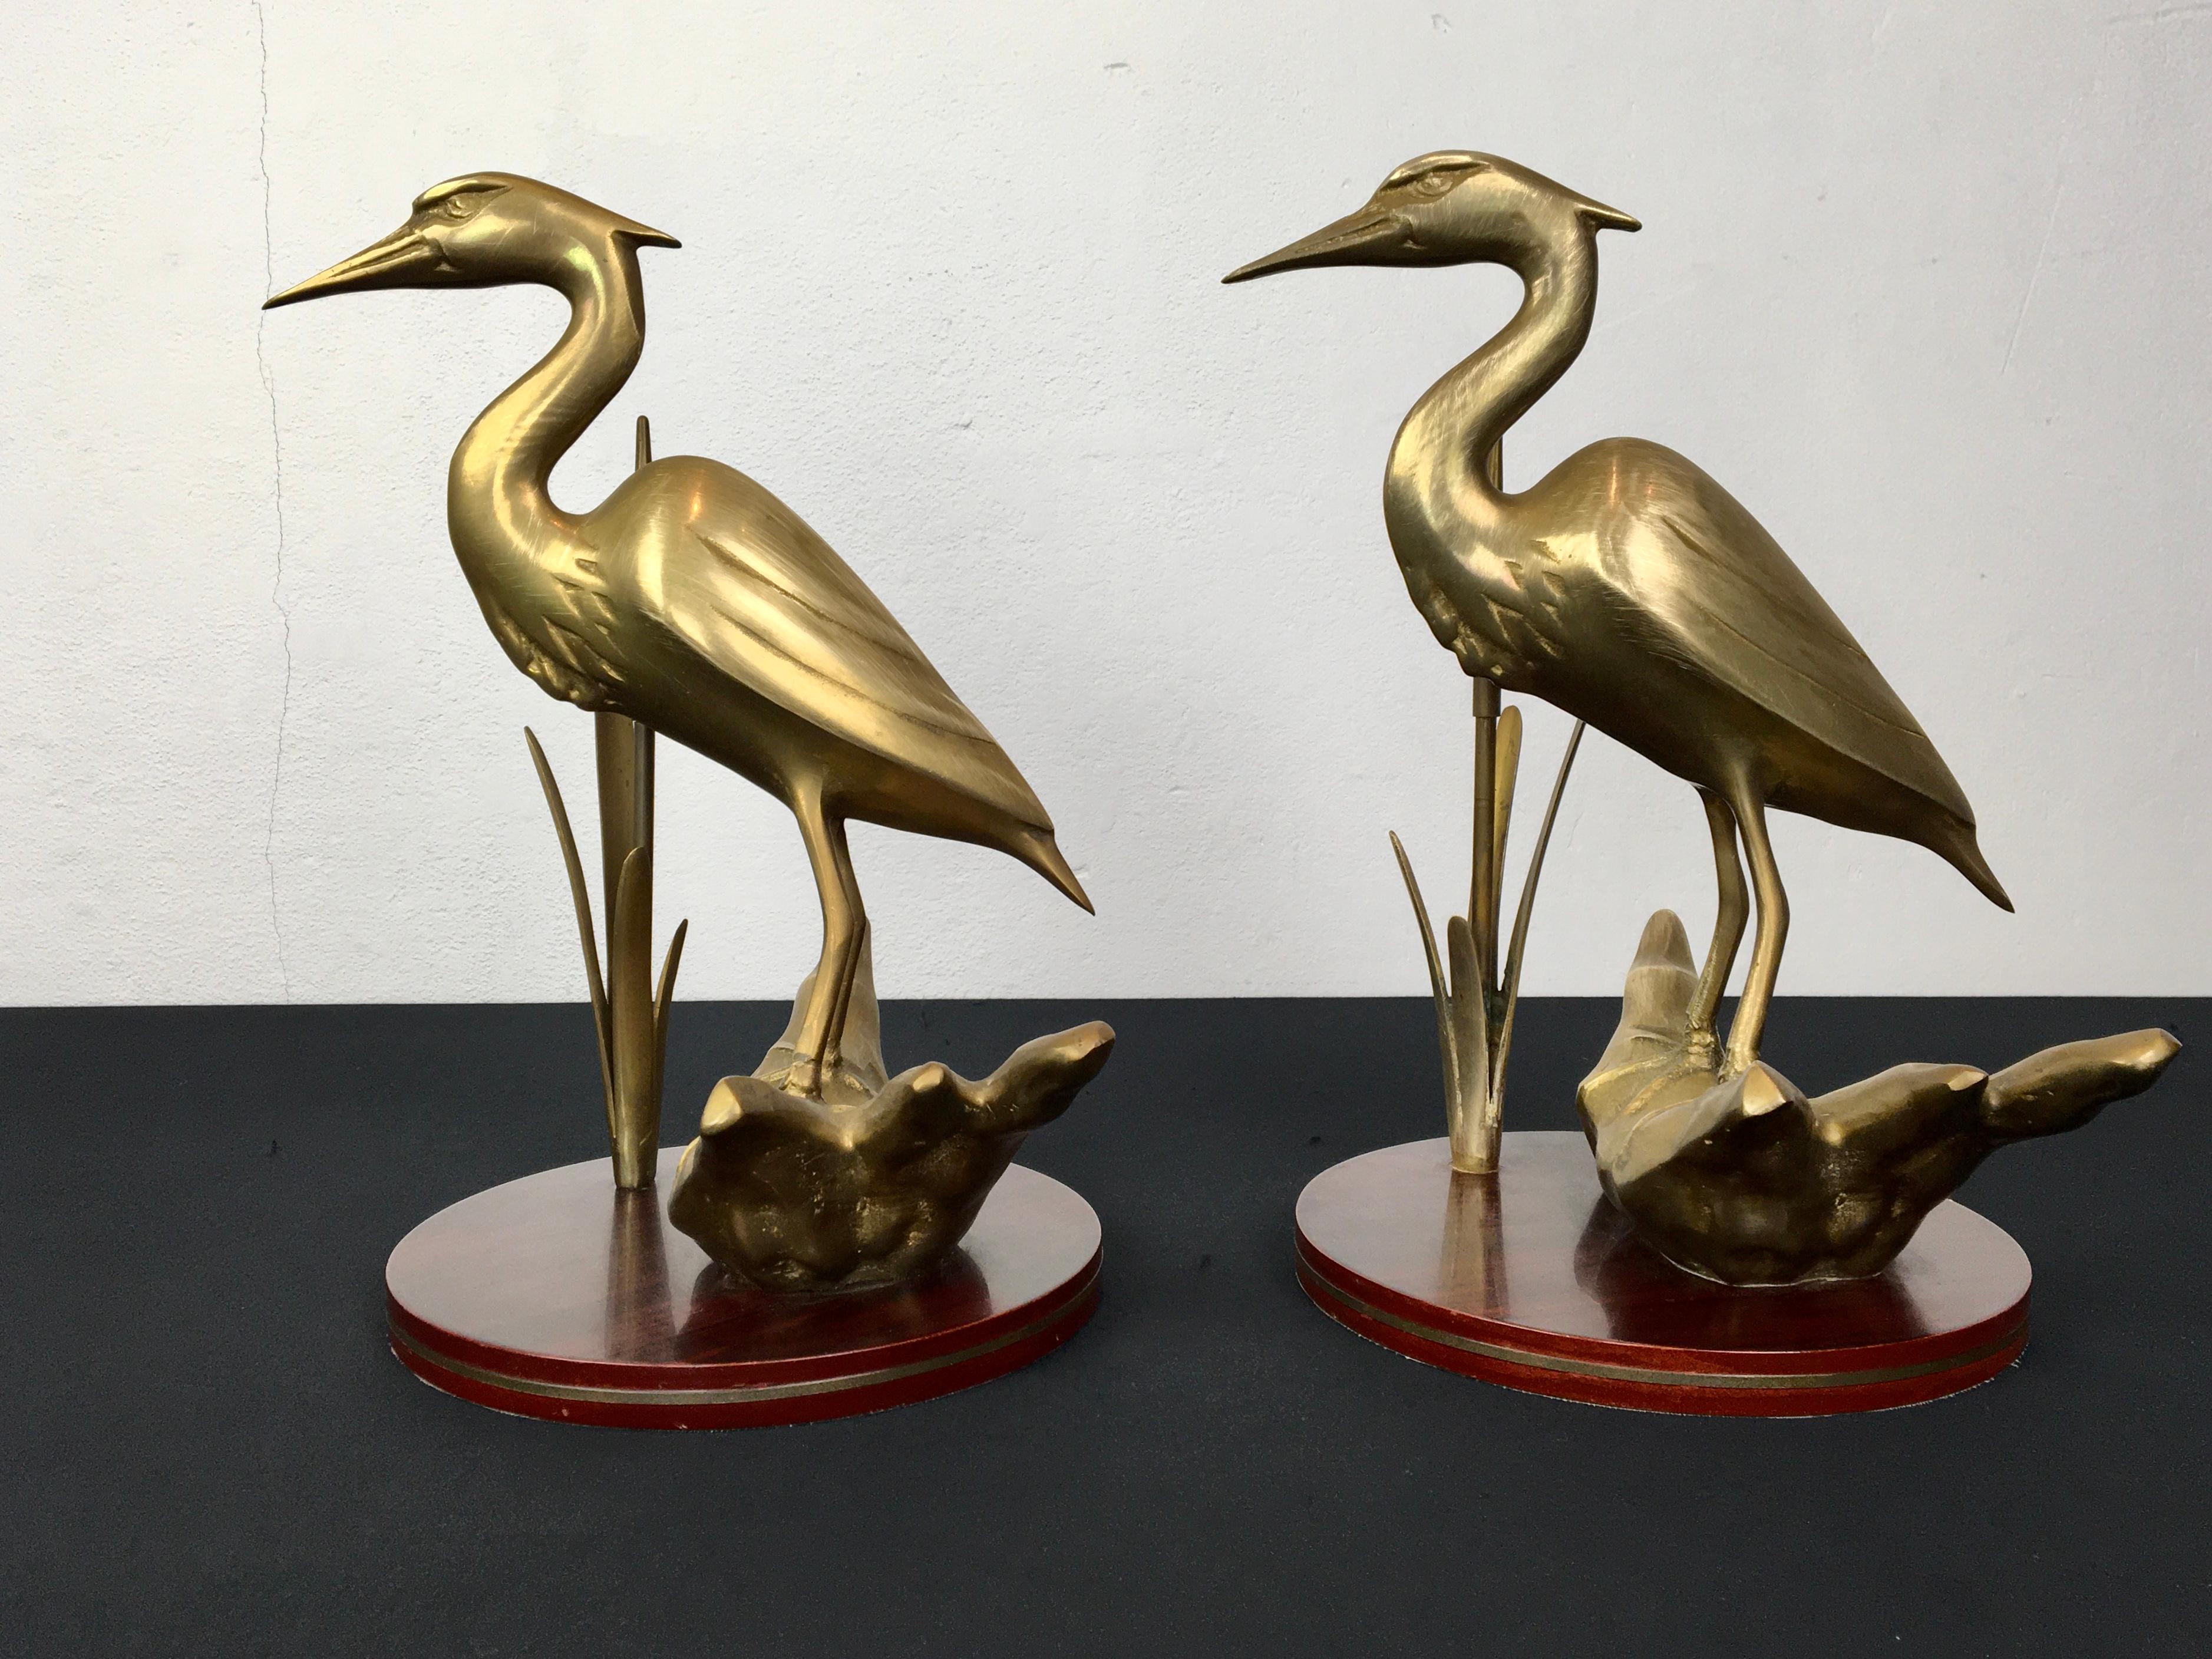 Pair of Brass Cranes Sculptures on Wood For Sale 11